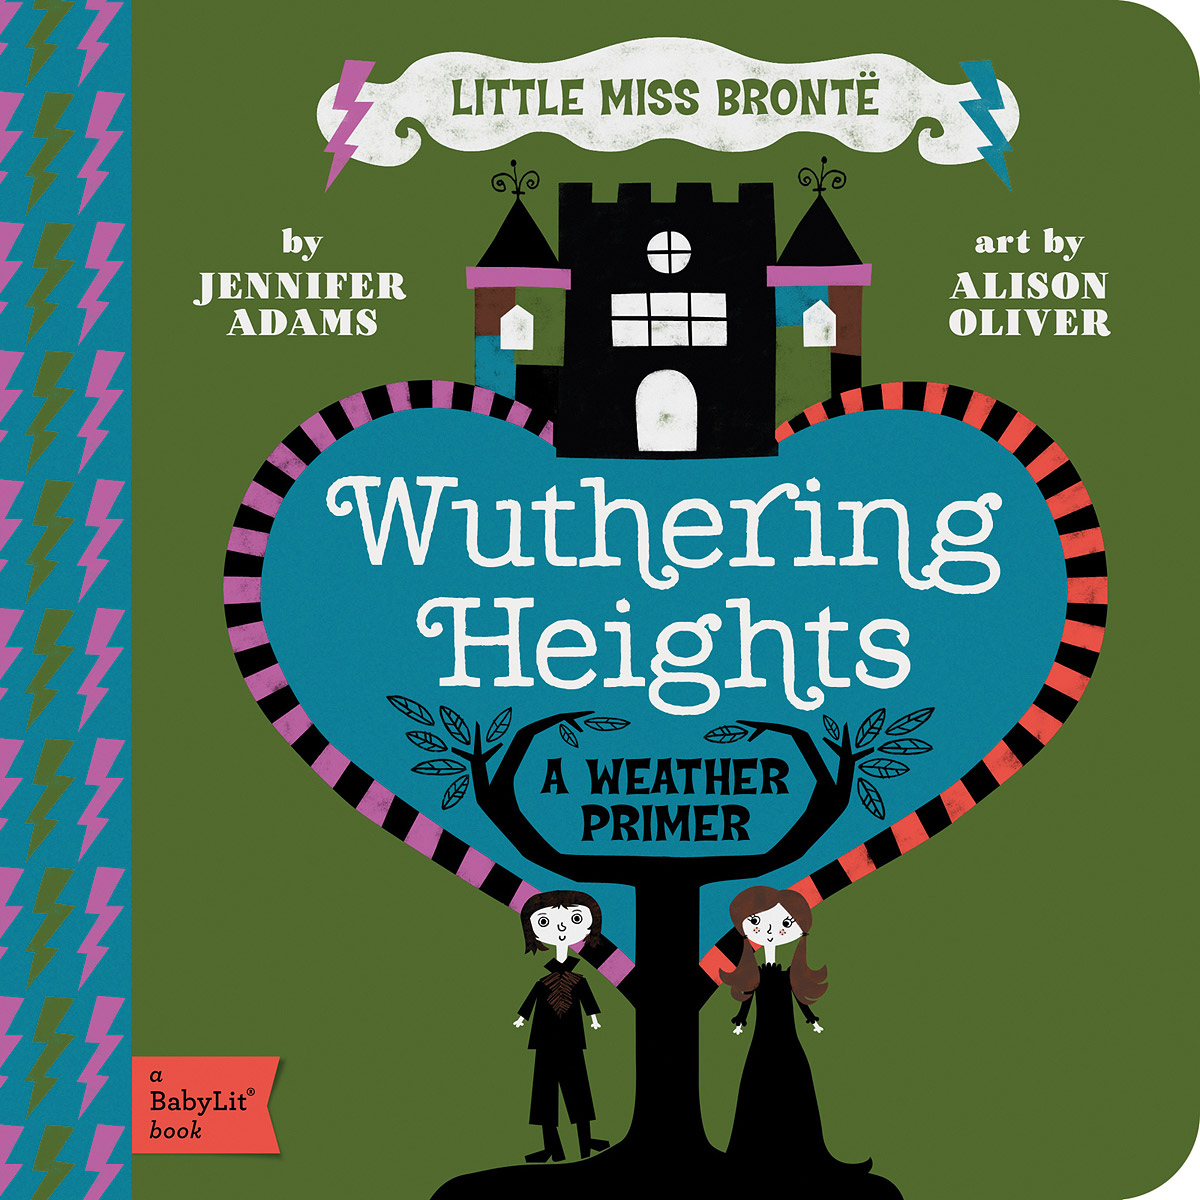 Little Miss Bronte: Wuthering Heights